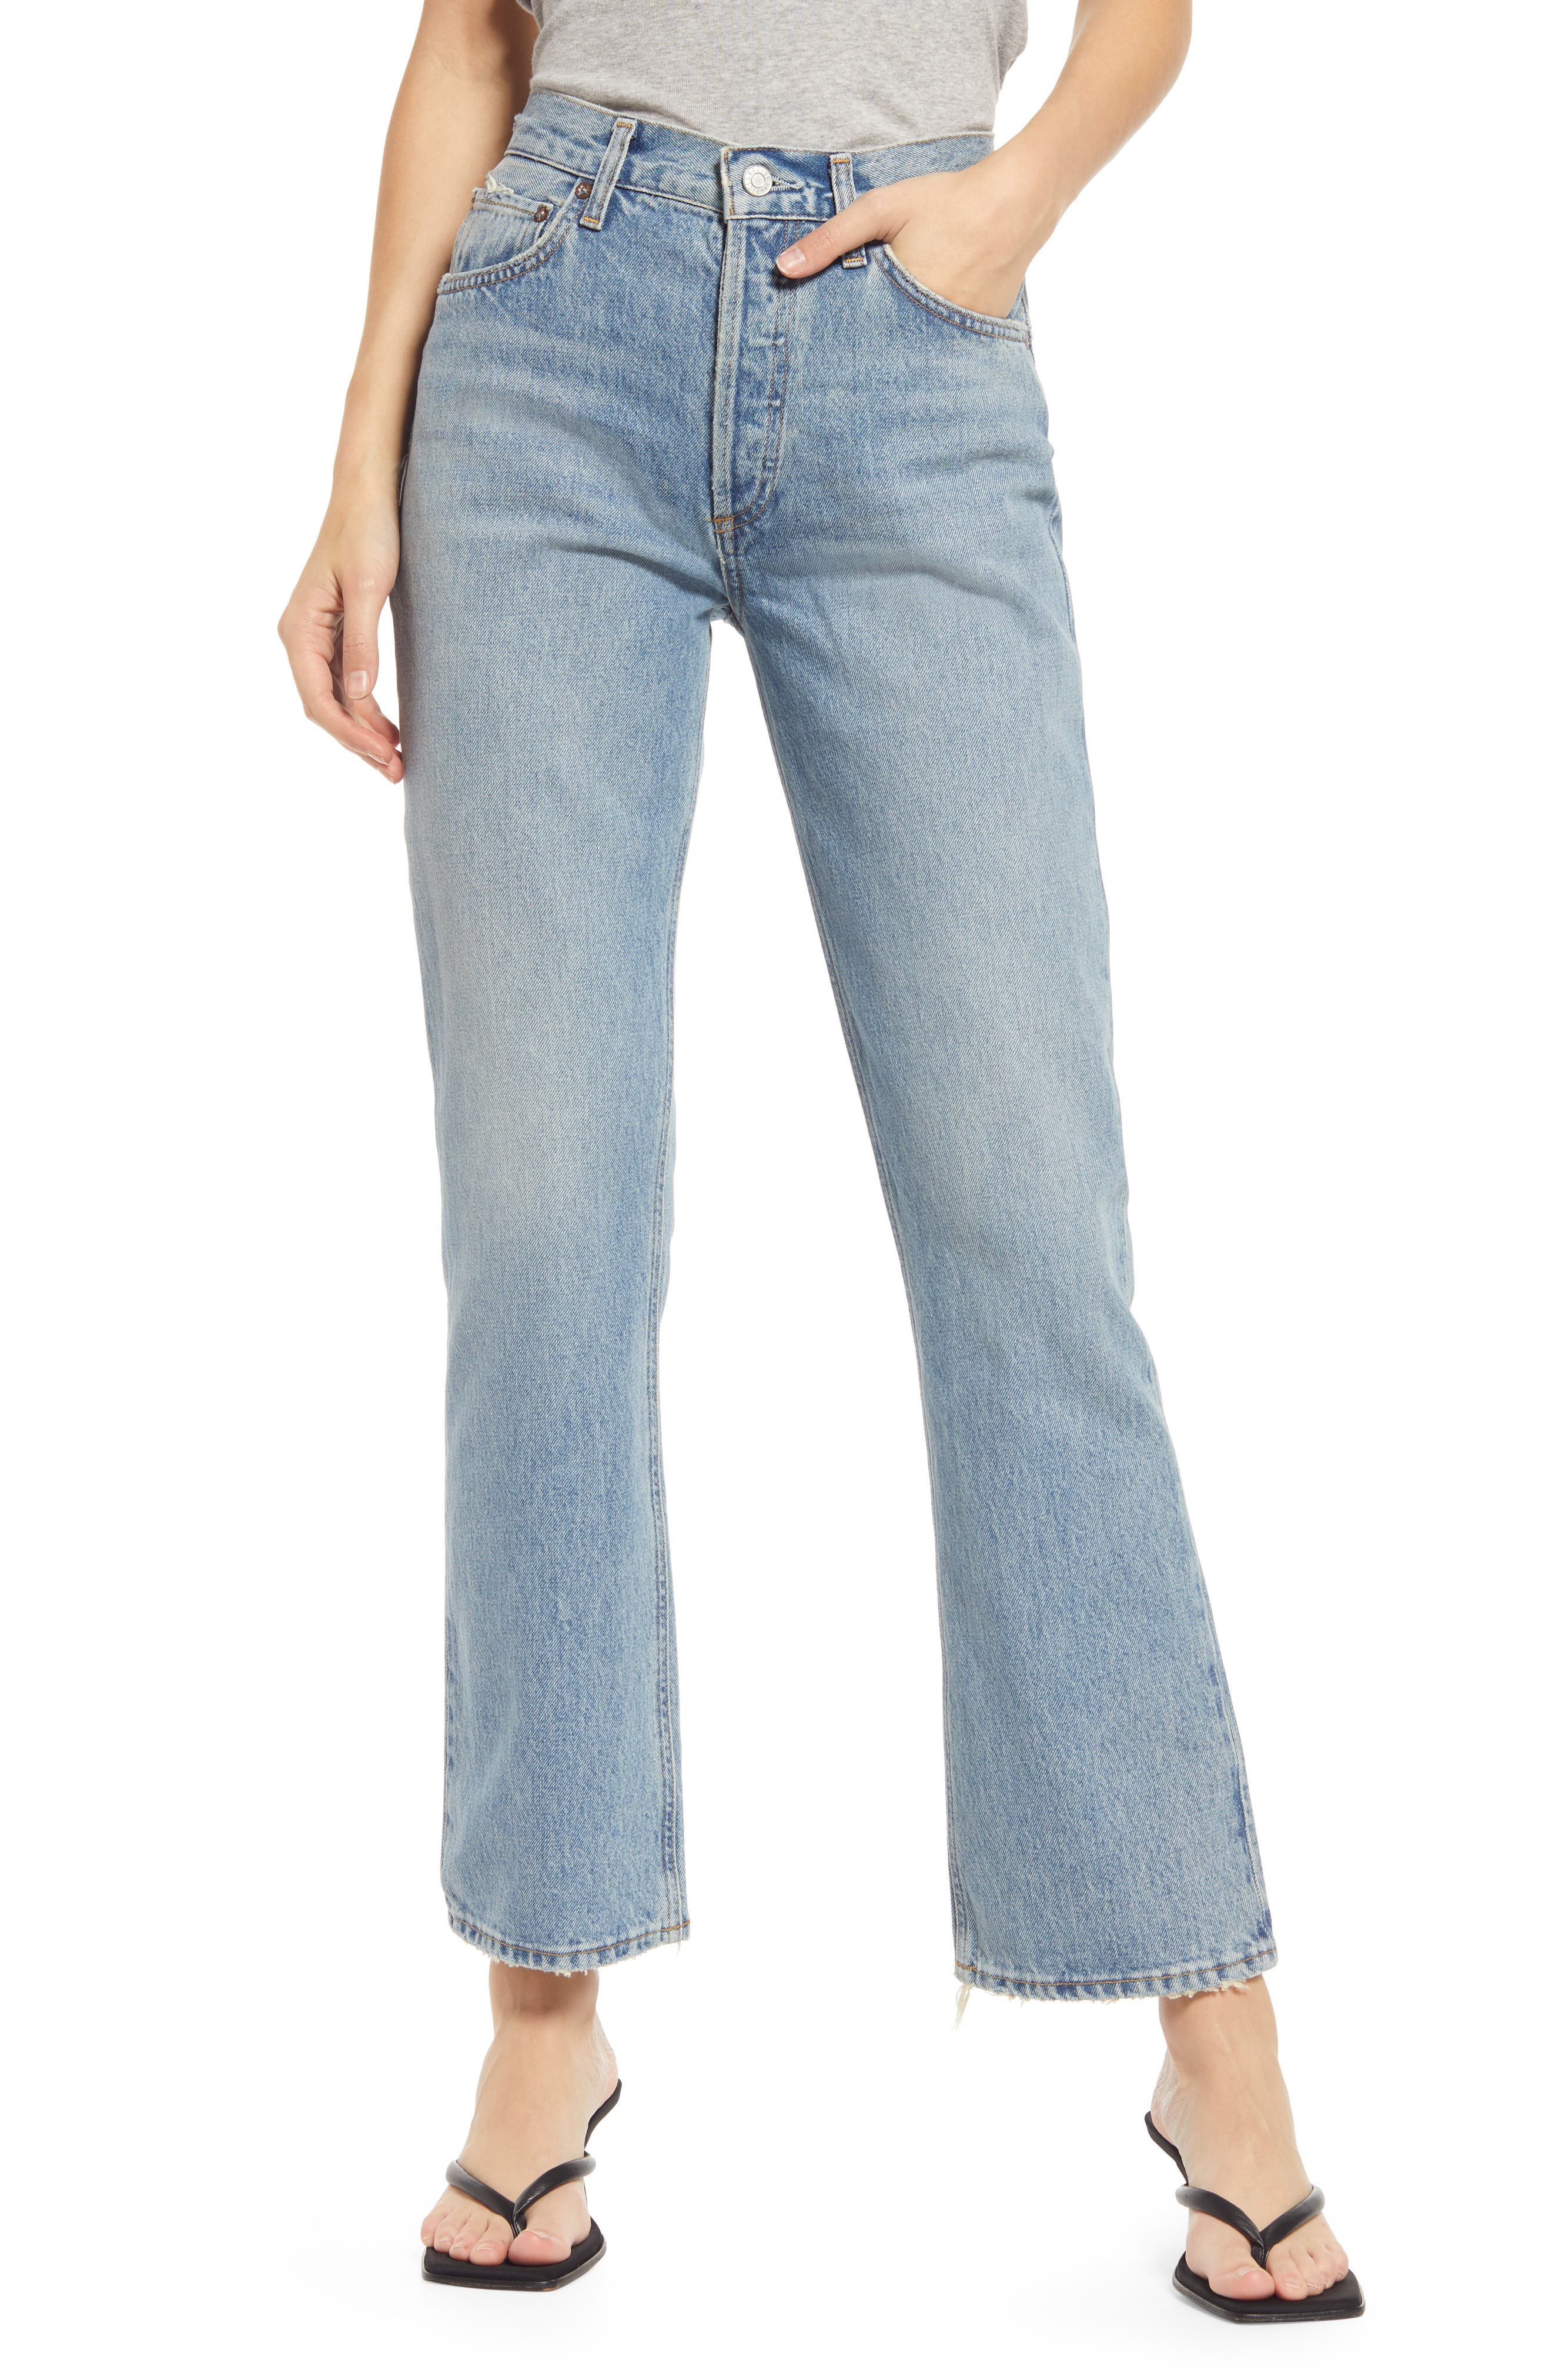 Agolde Denim Mid-Rise Jeans Relaxed Bootcut in Blau Damen Bekleidung Jeans Bootcut Jeans 